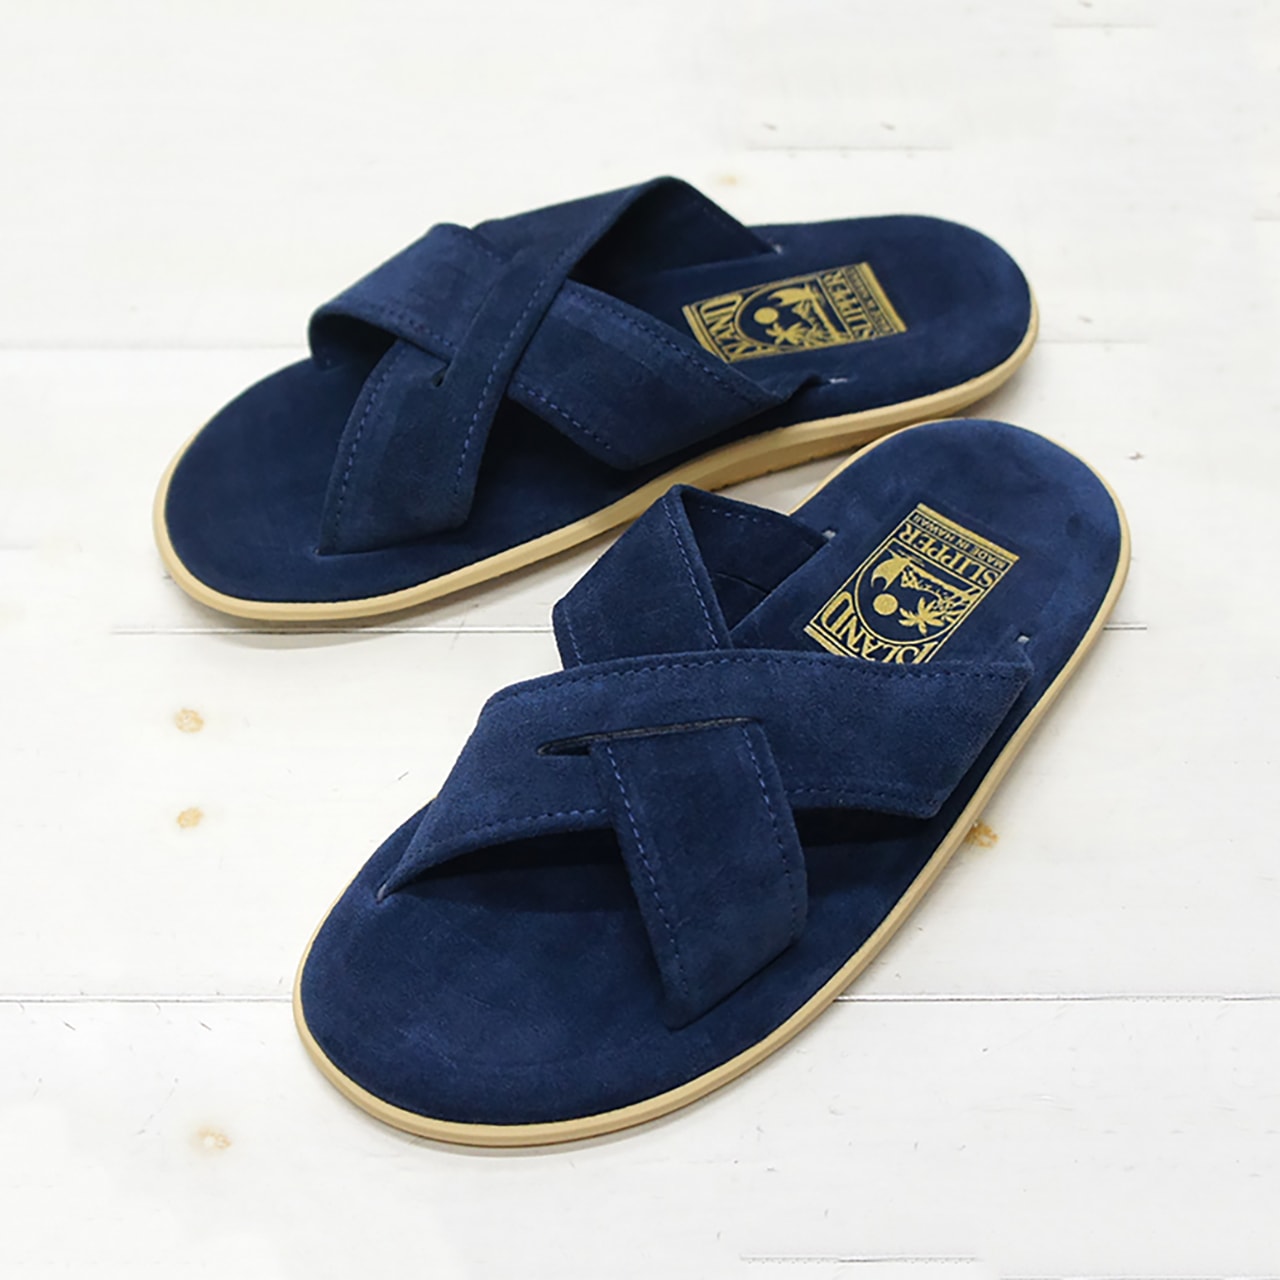 High Quality Rubber Flip Flops and Slippers for Women Island Casual Chappal  and Flip Flops for Ladies